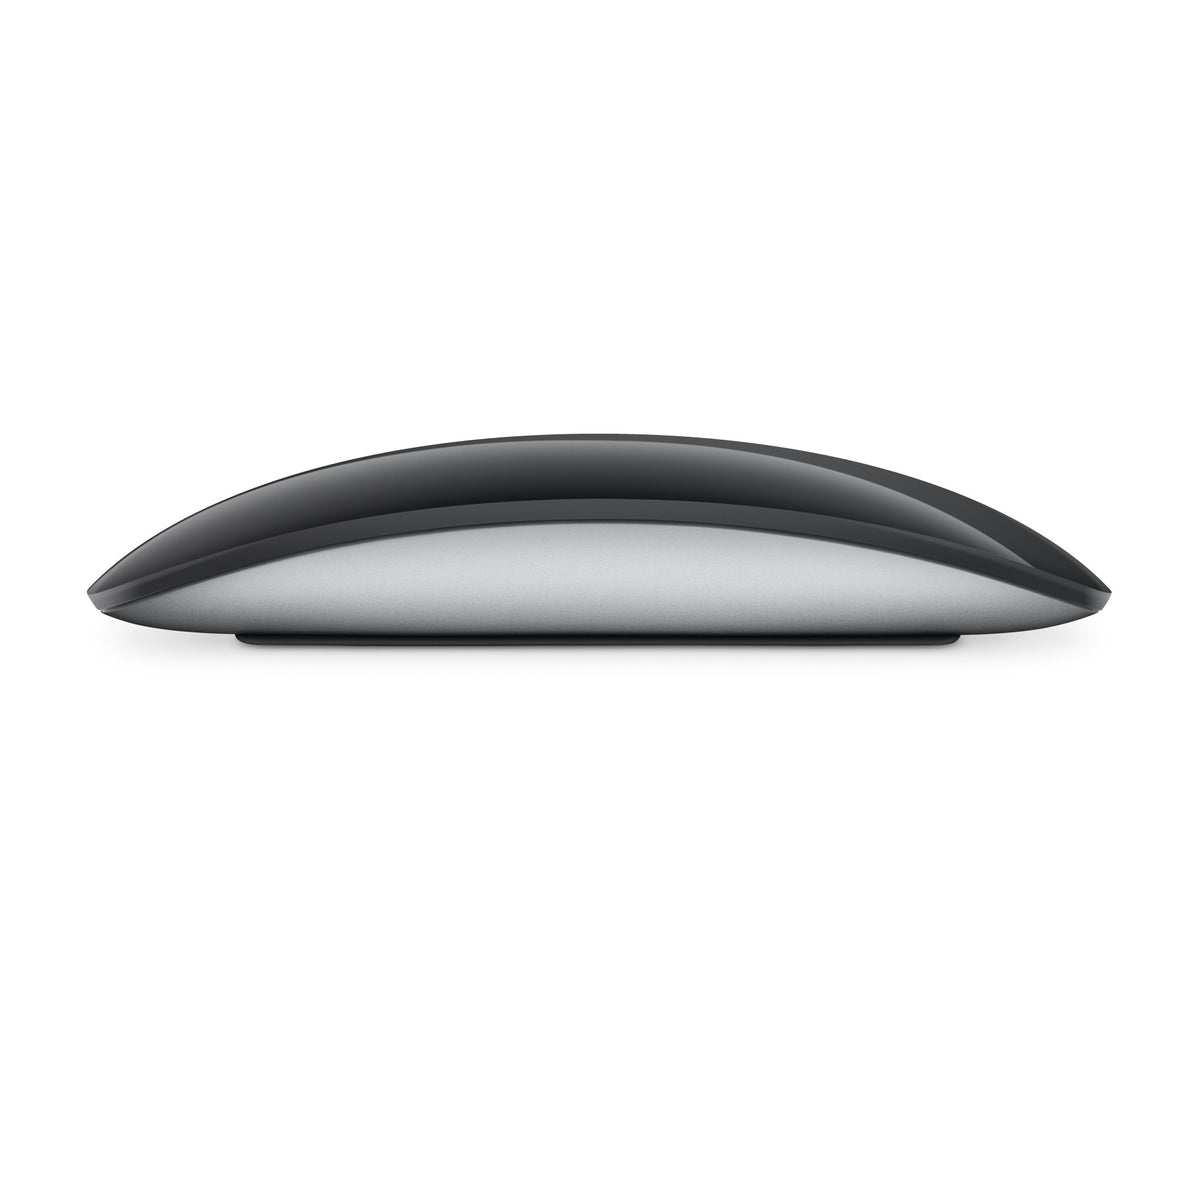 Apple Magic Mouse - Black Multi-Touch Surface